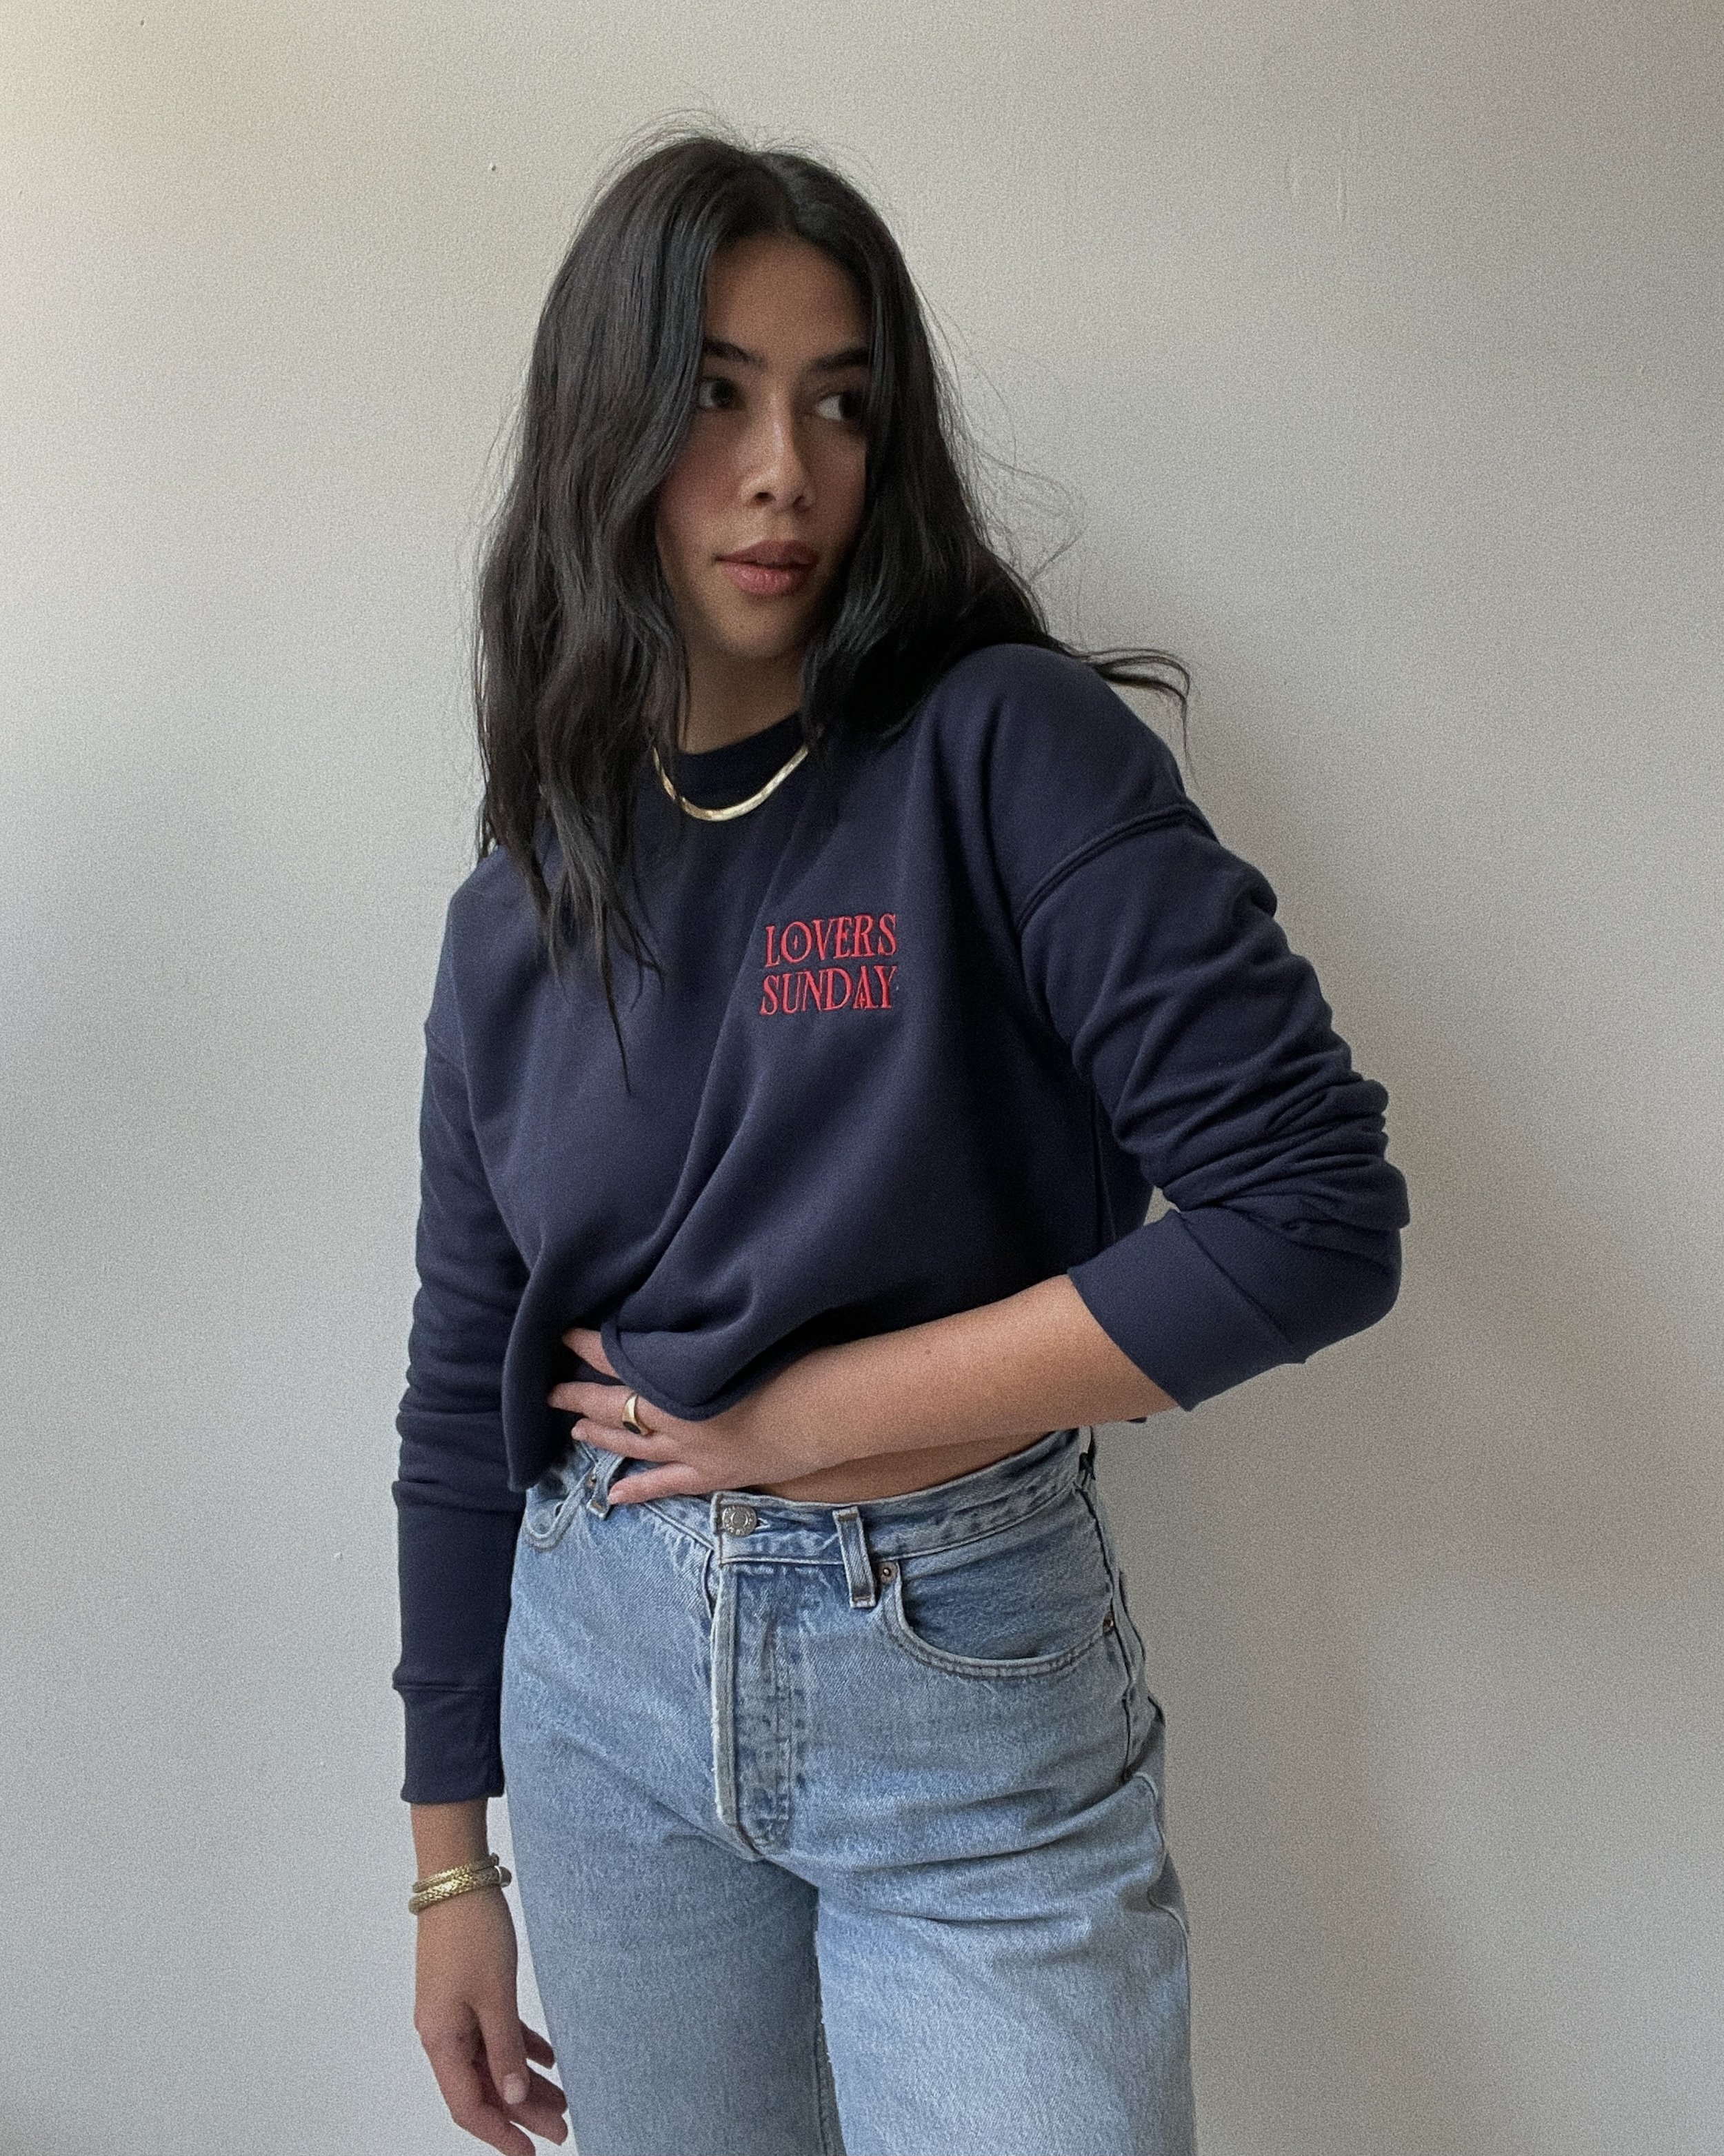 LOVERS CROPPED SWEATSHIRT — Lover's Sunday